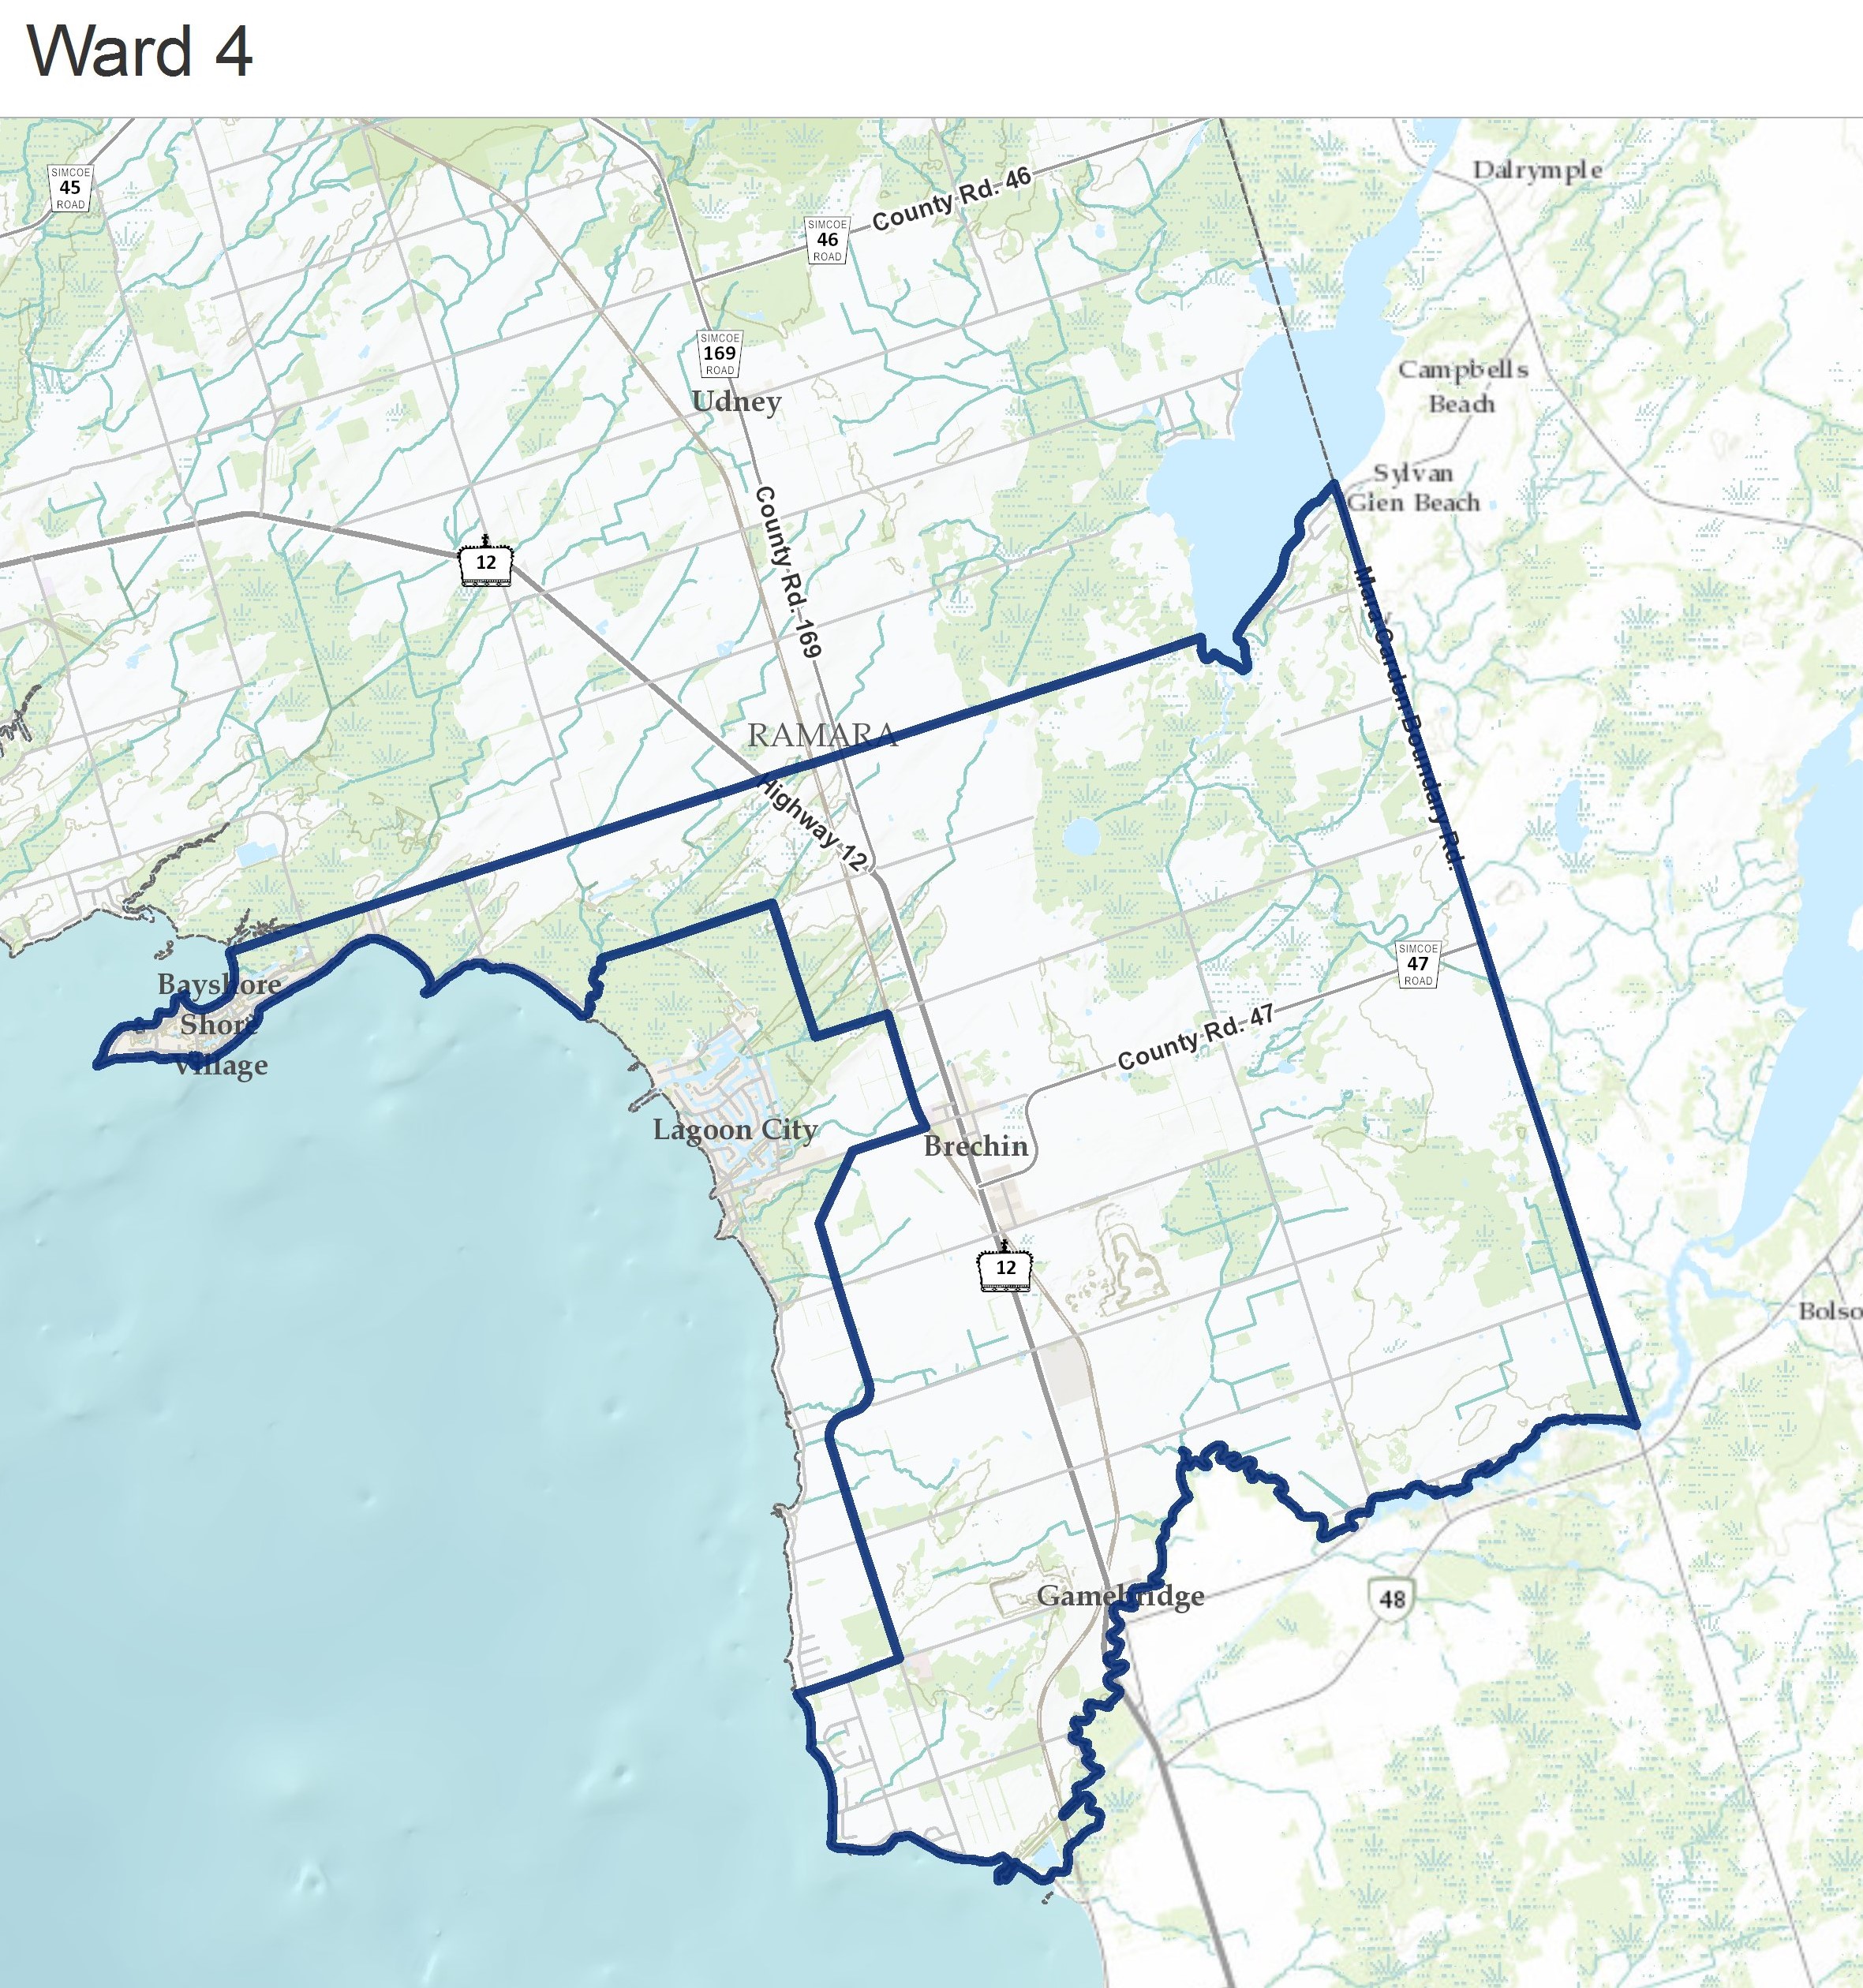 Map showing the area of Ward 4